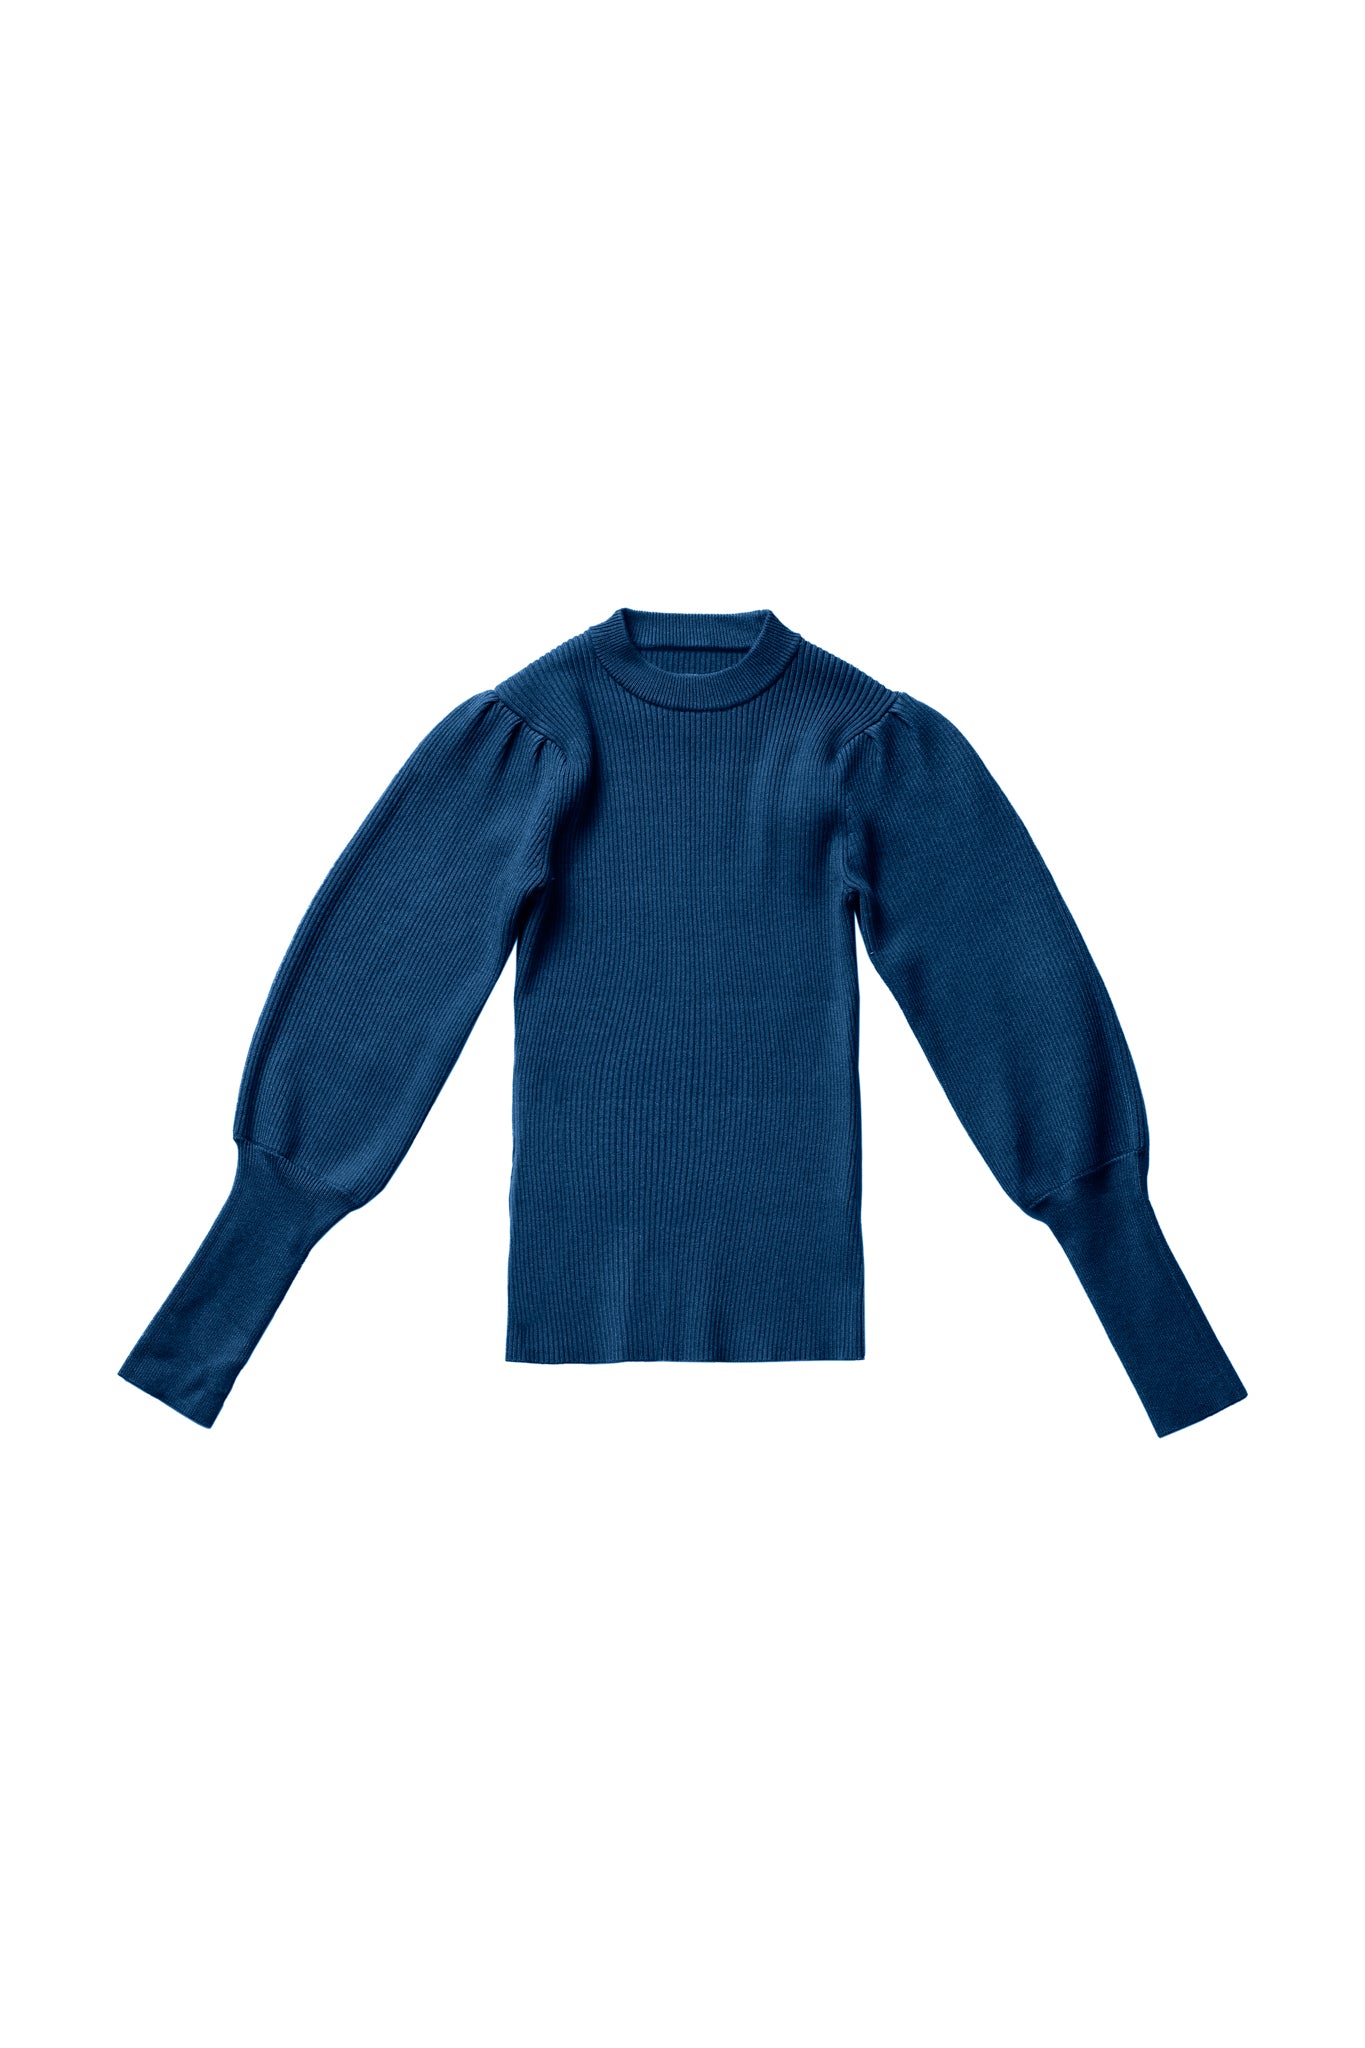 Puff Sleeves Sweater in Teal #8140ZK FINAL SALE